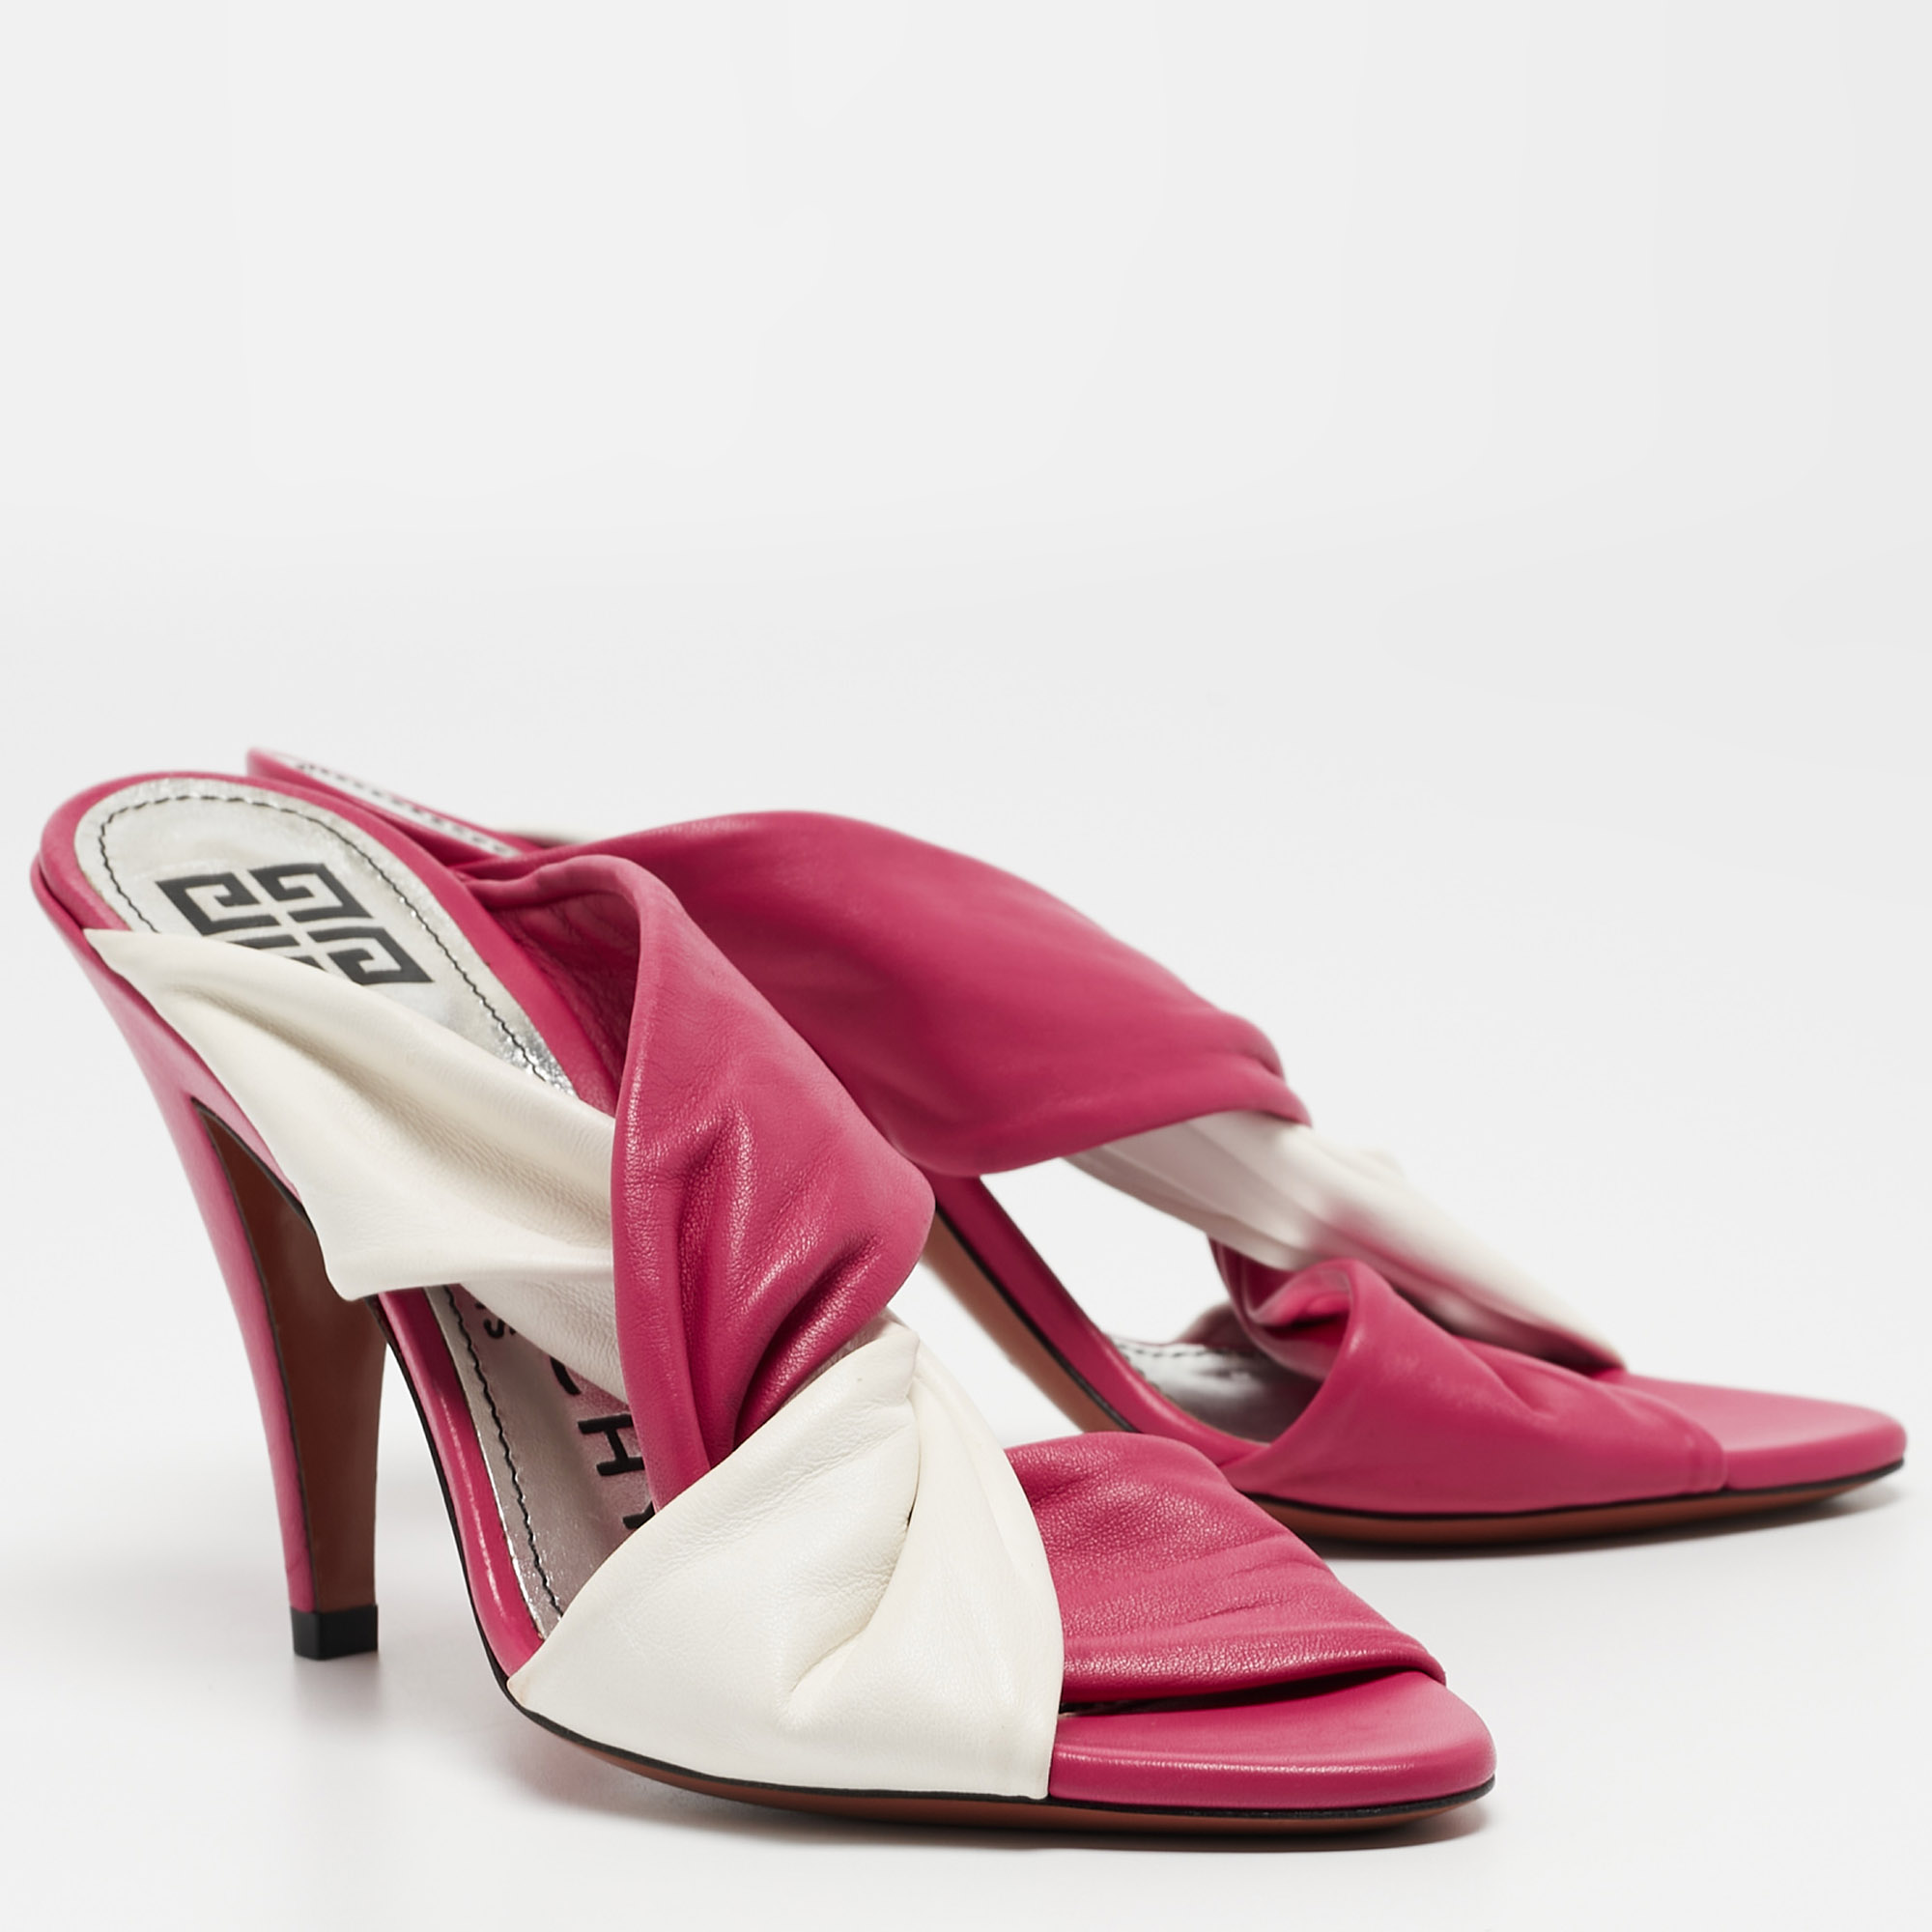 Givenchy Pink/White Leather Slide Sandals Size 36.5